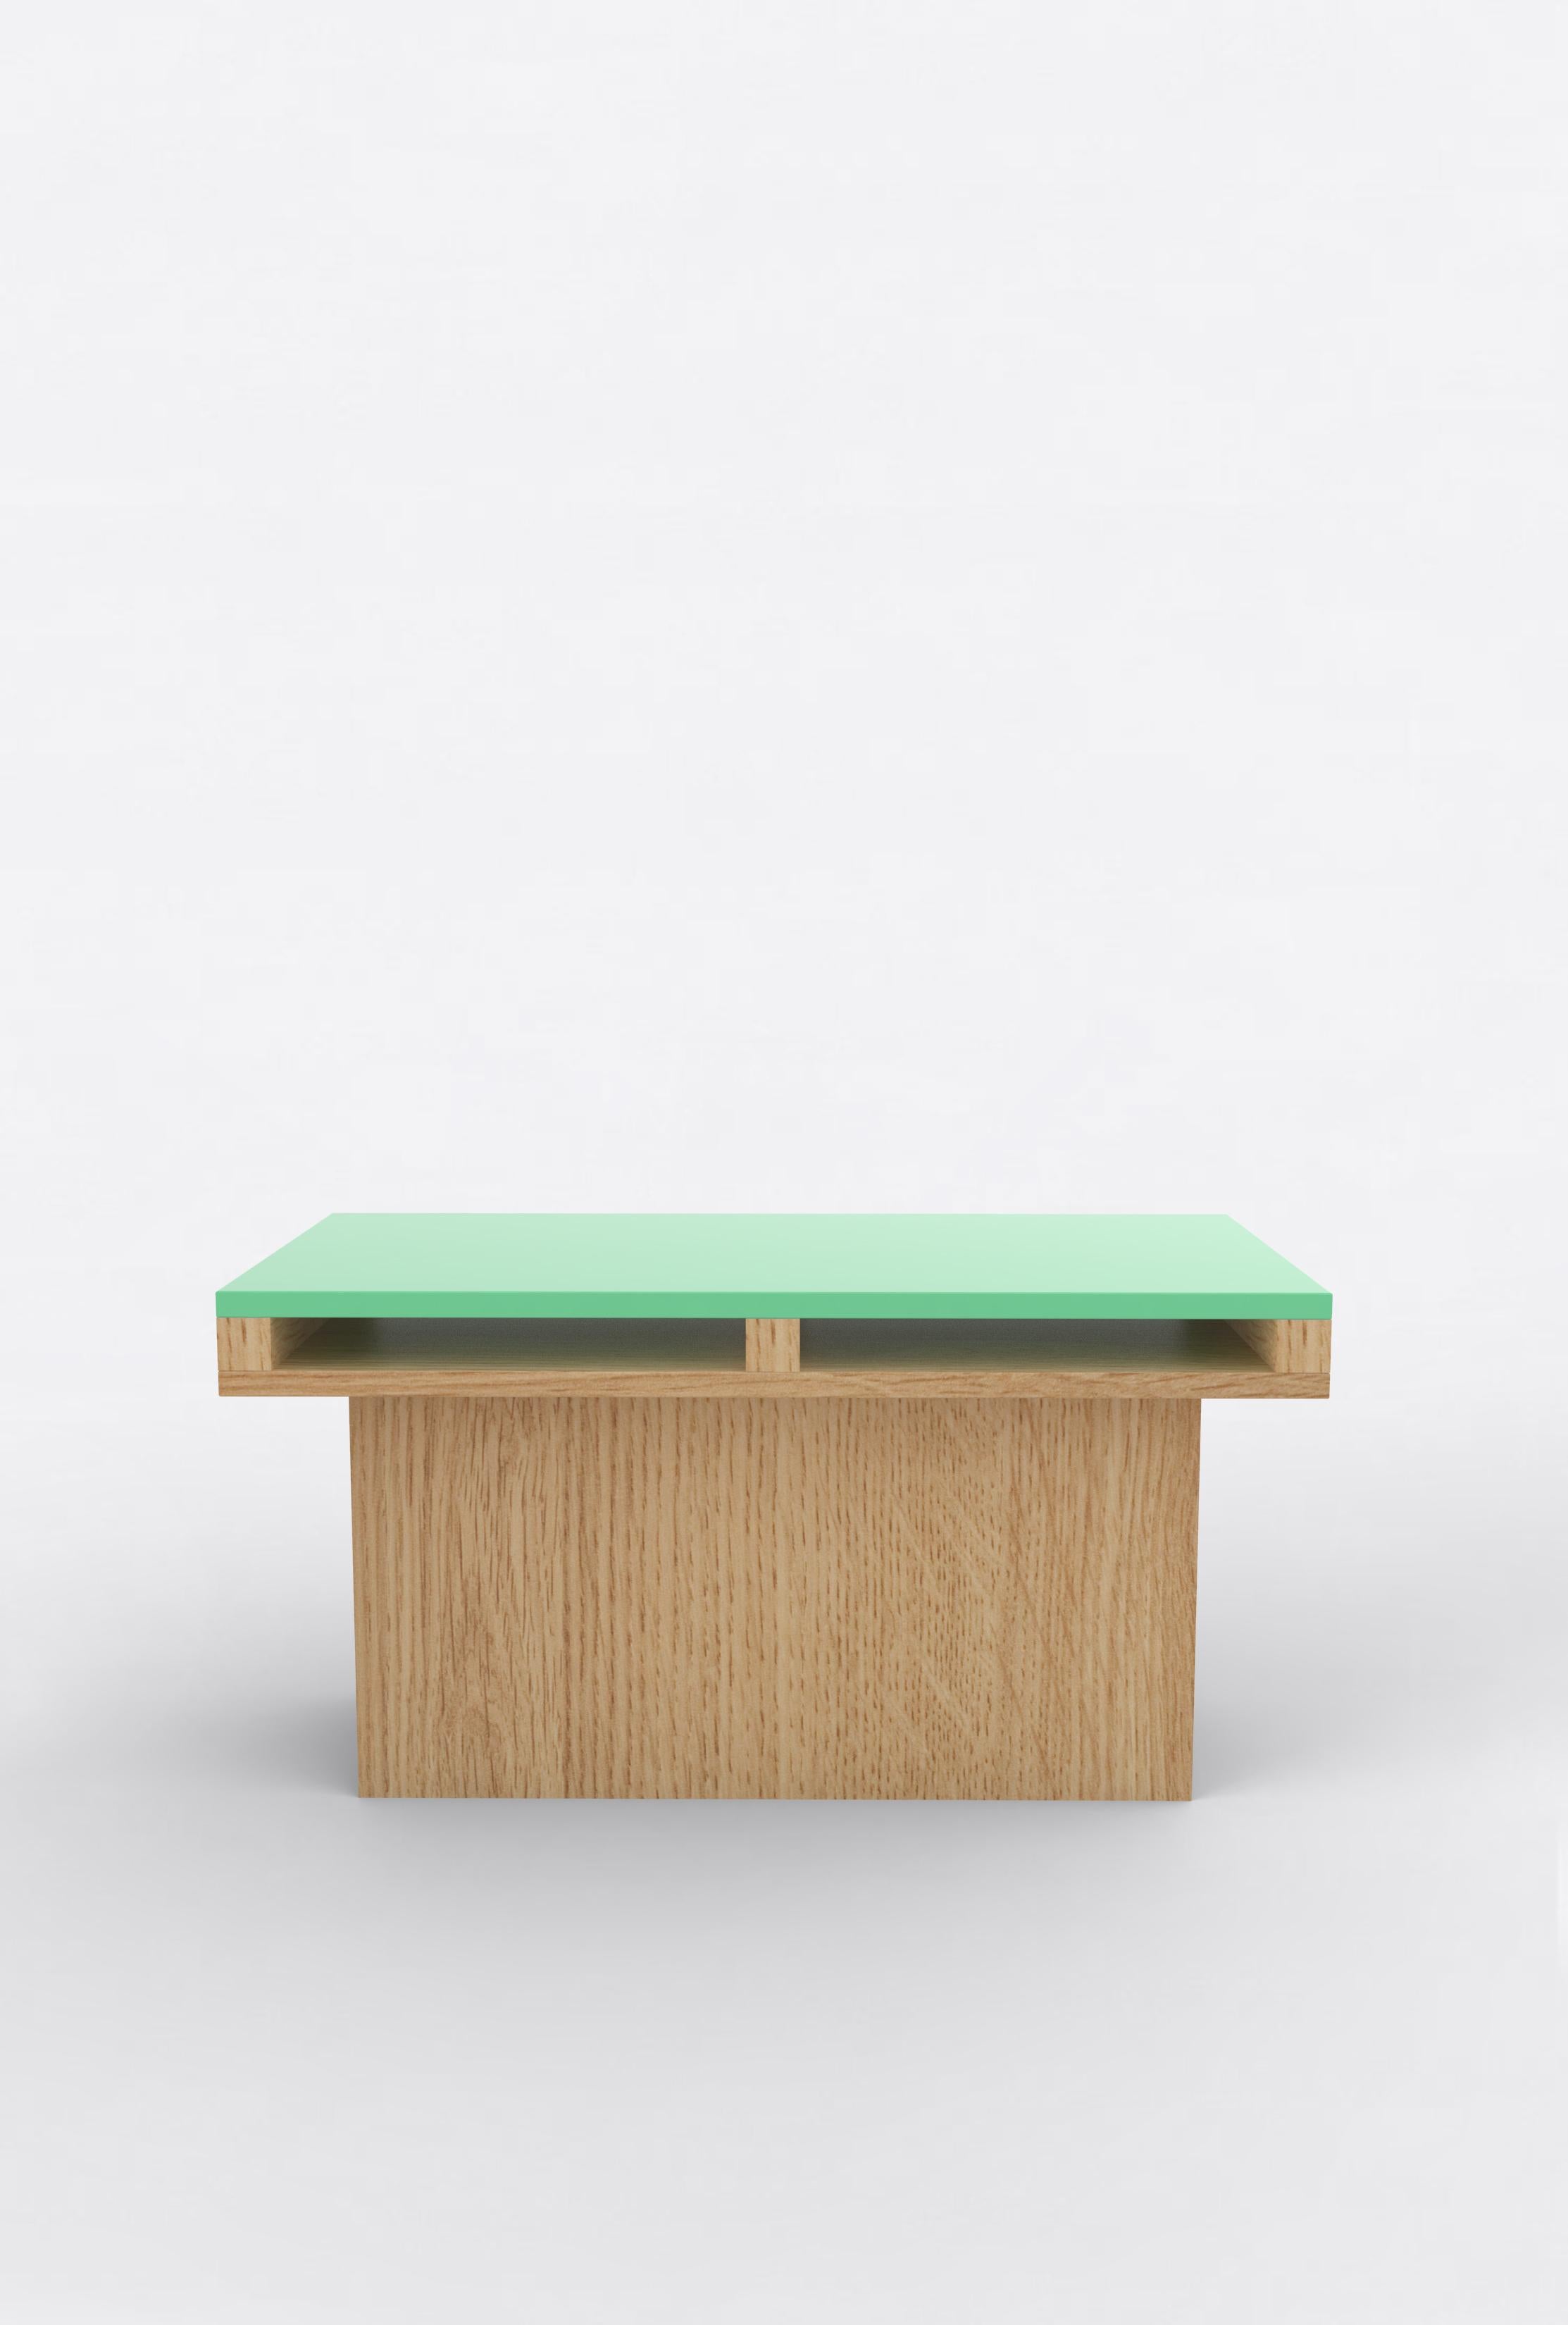 Orphan Work 102 End Table, 2019
Shown in oak and color
Available in natural oak with painted top
Colors available: pink, mint, yellow, blue and brown.
Measures: 31” L x 15” D x 15” H

Custom colors available by request.
Additional dimensions,